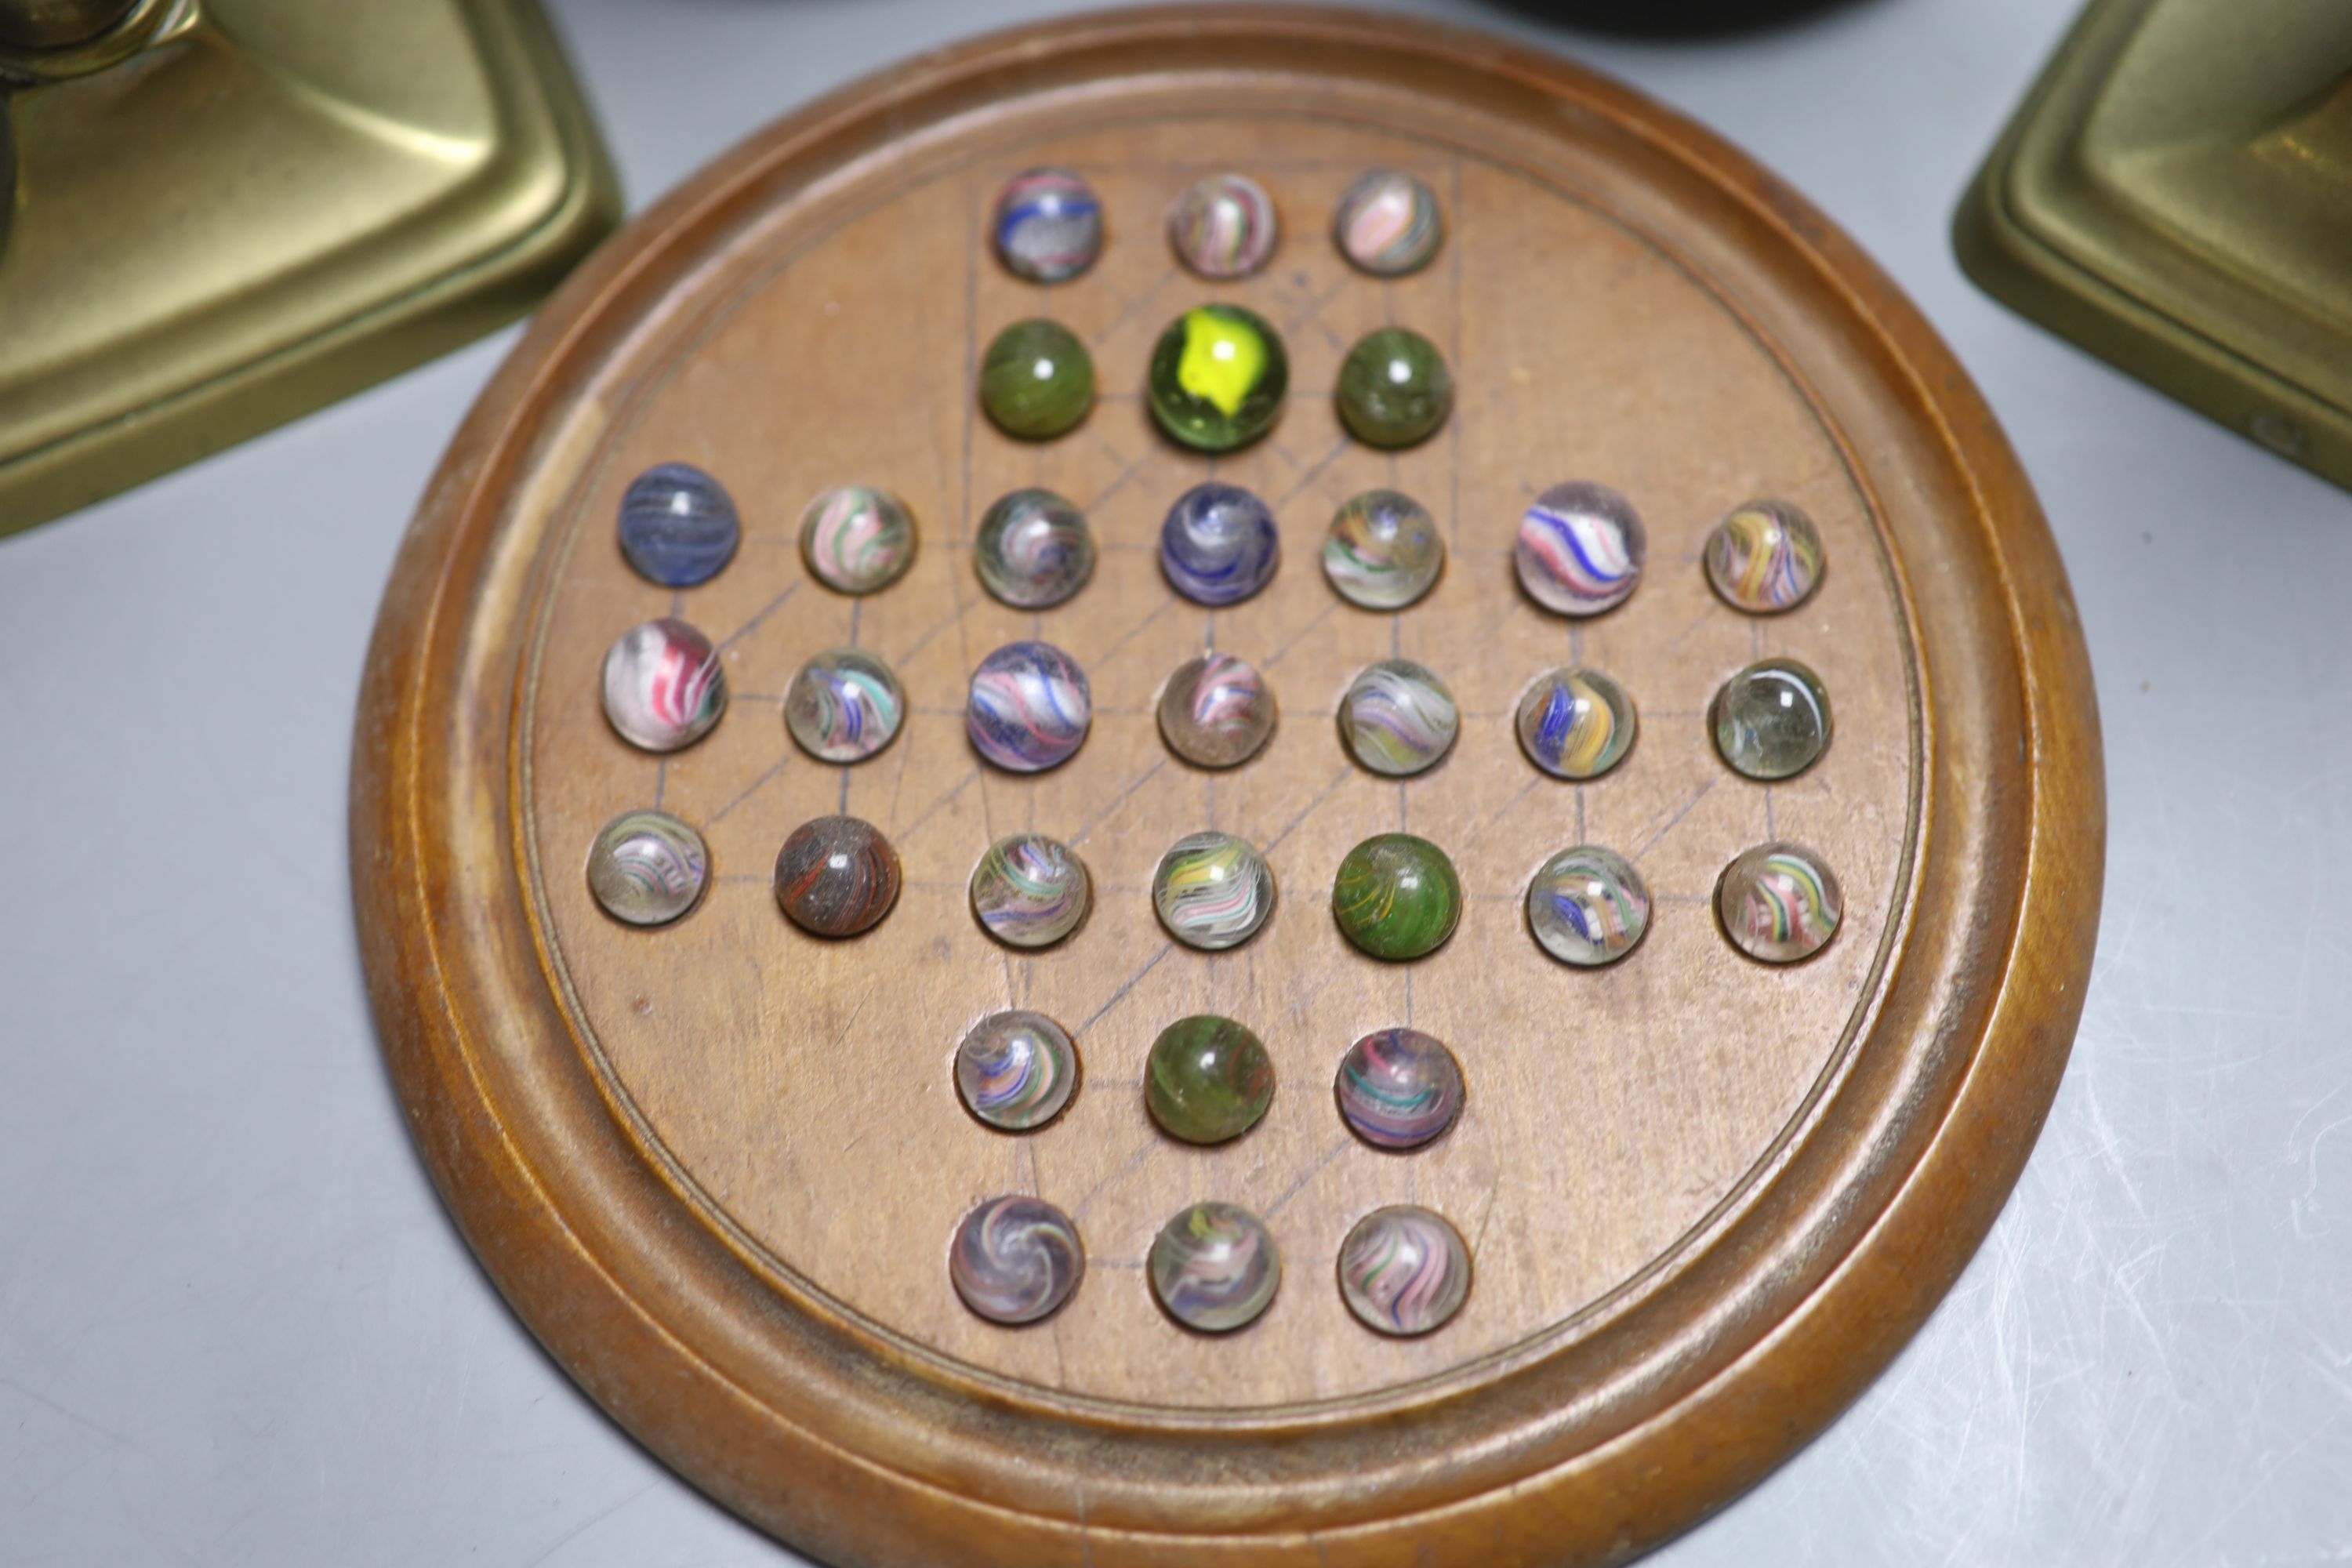 Two pairs of brass candlesticks and a solitaire board with marbles